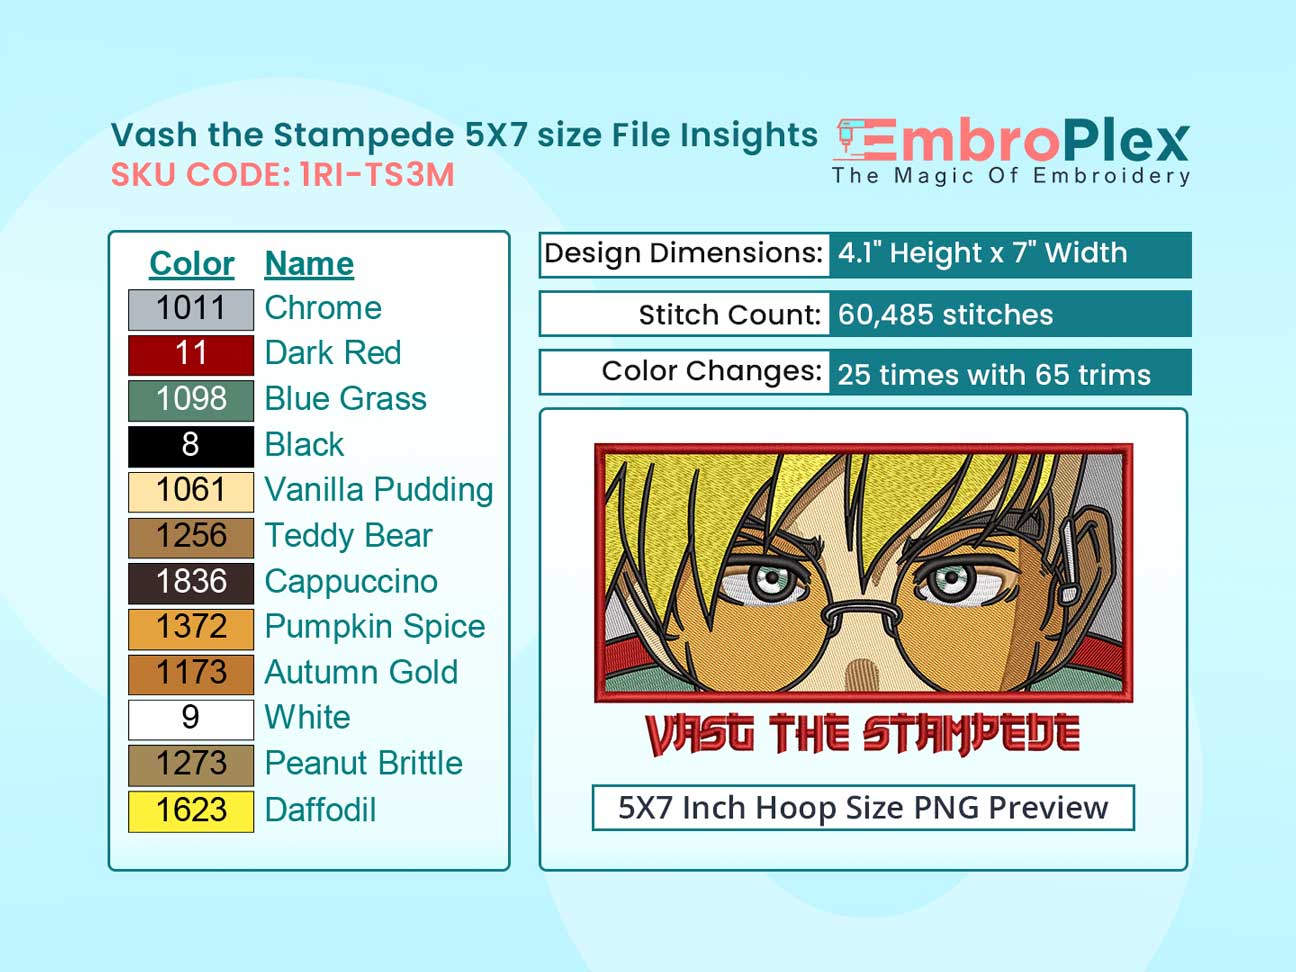 Anime-Inspired Vash the Stampede Embroidery Design File - 5x7 Inch hoop Size Variation overview image